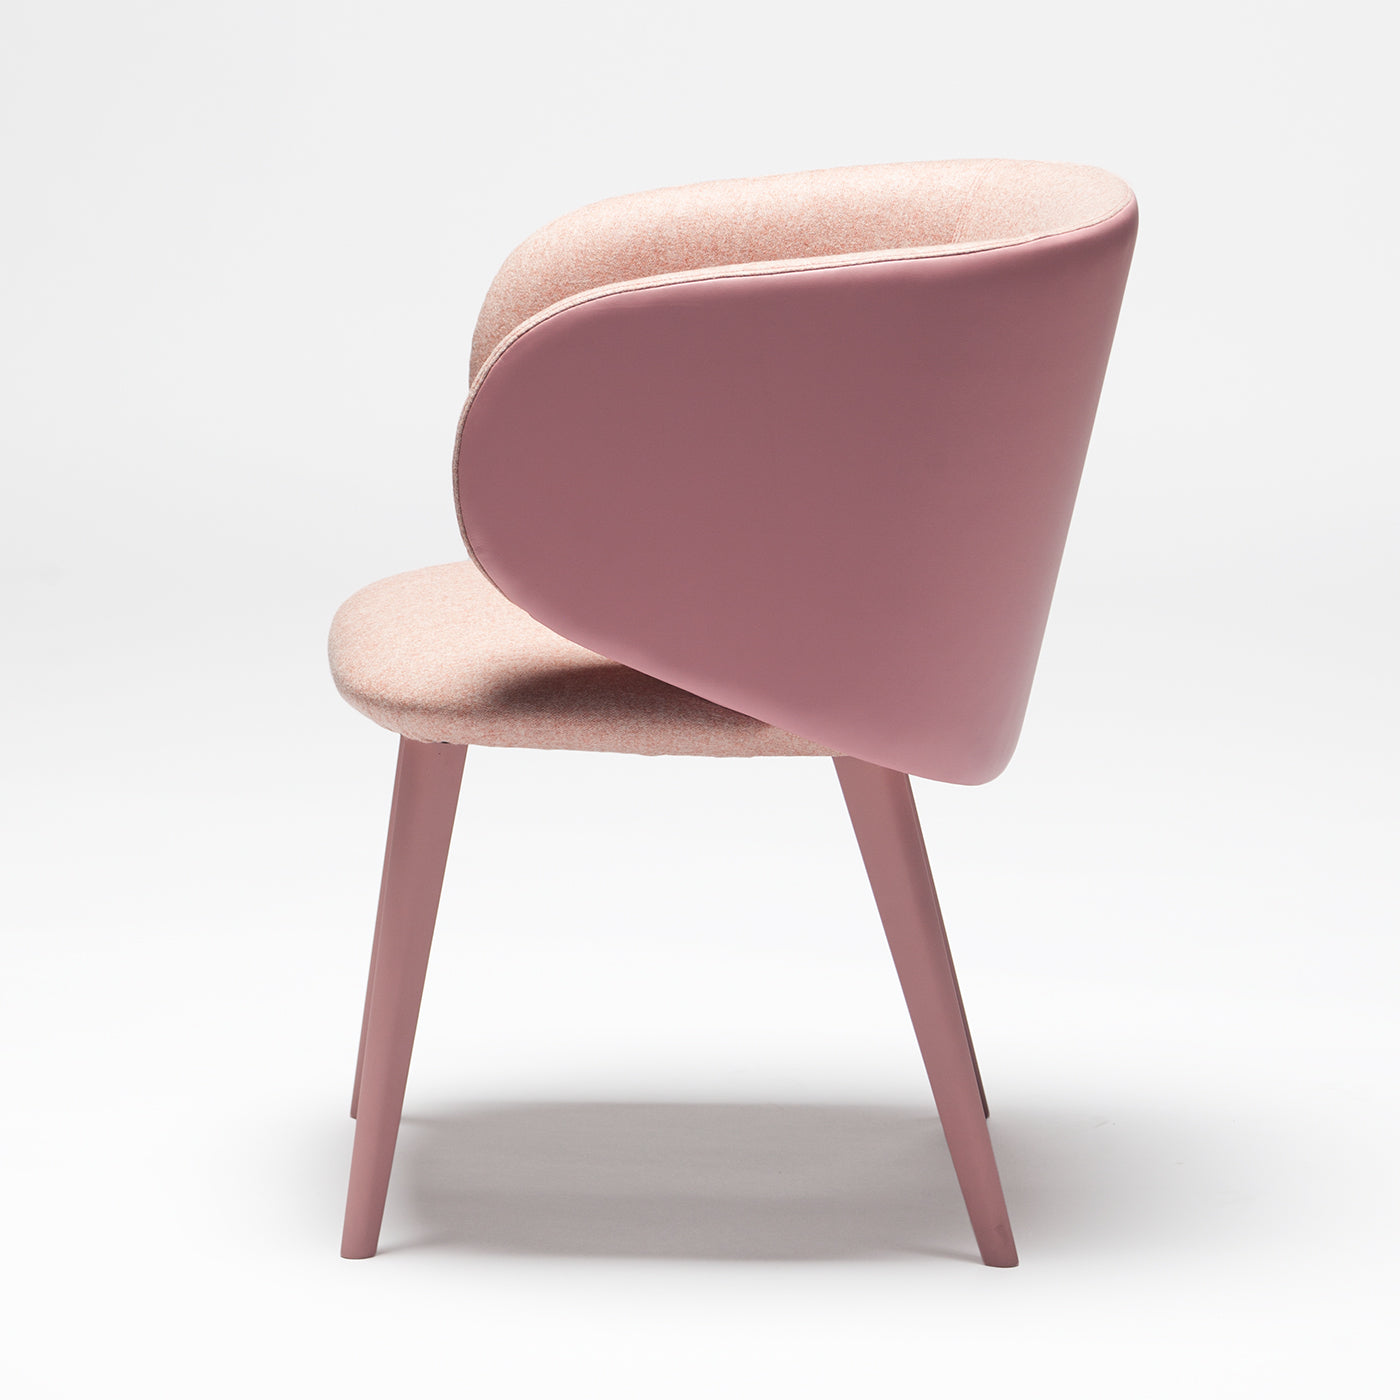 Caura 080 Pink Chair by Vicent Clausell - Alternative view 2